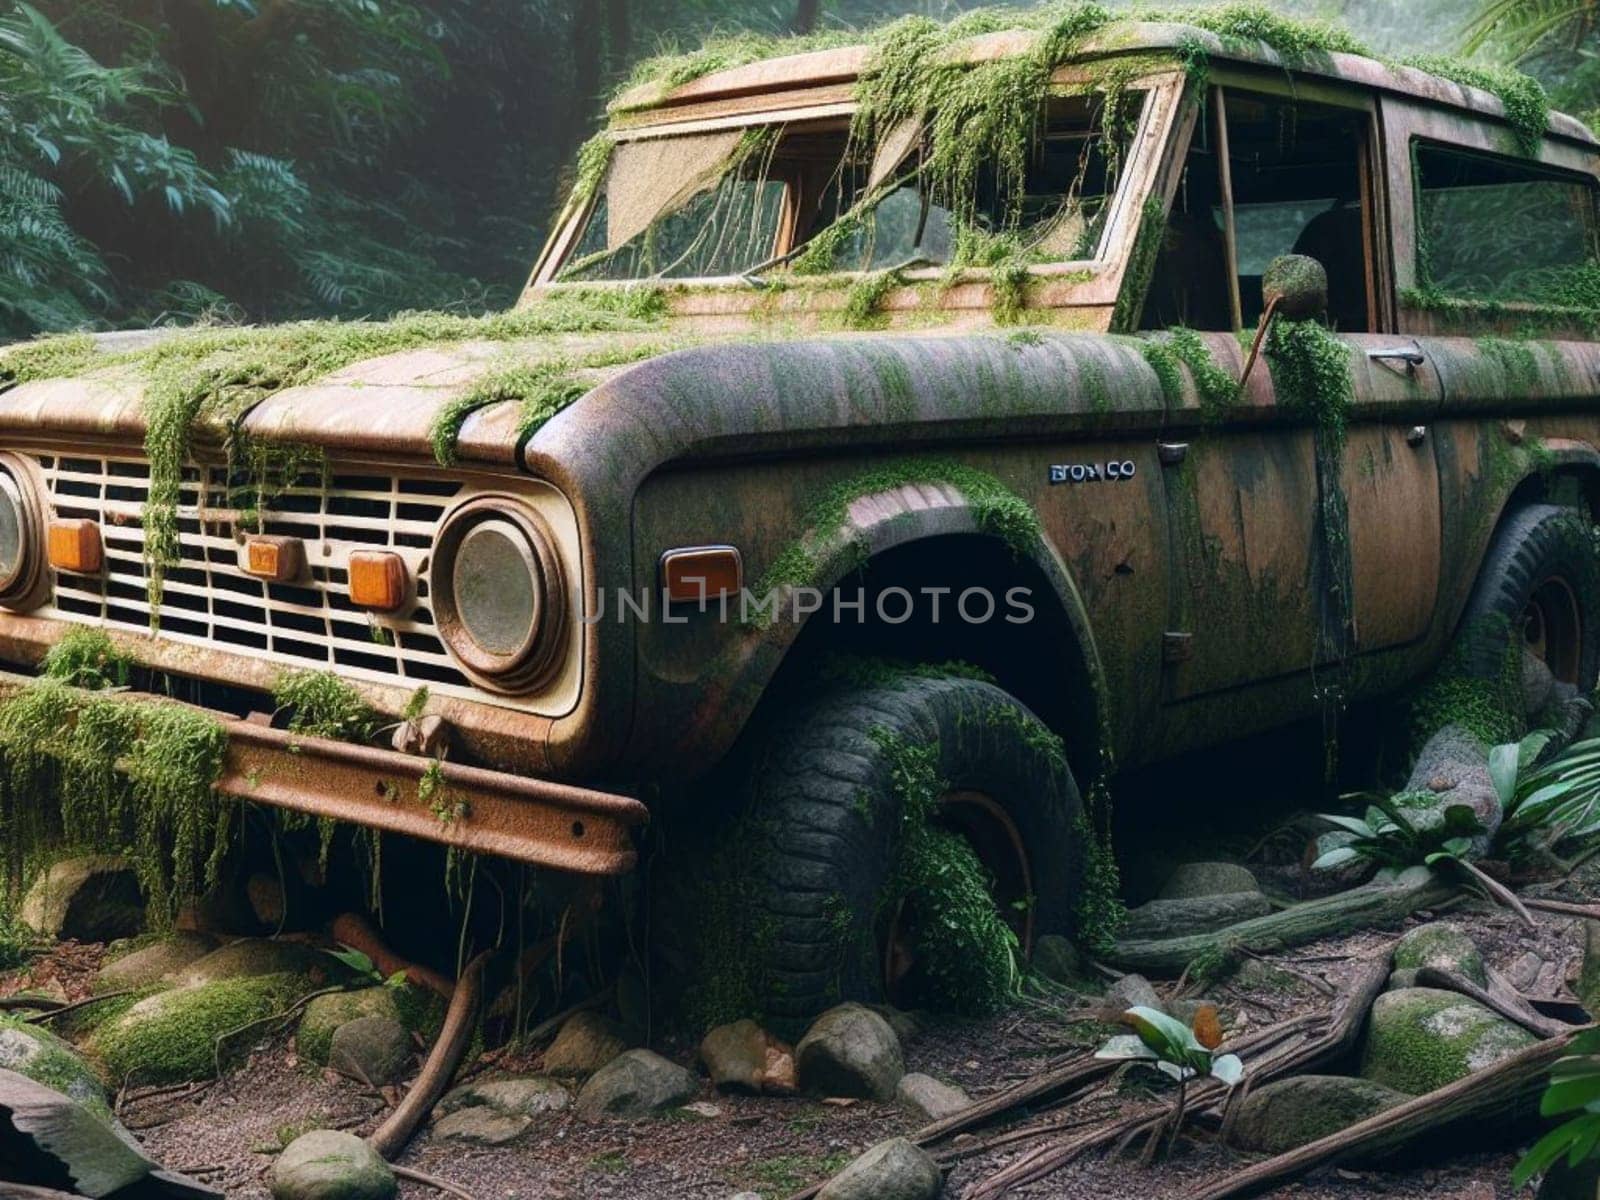 Abandoned rusty expensive atmospheric 4x4 suvas circulation banned for co2 emission 2030 agenda , severe damage, broken parts, plants overgrowth bloom flowers. ai generated